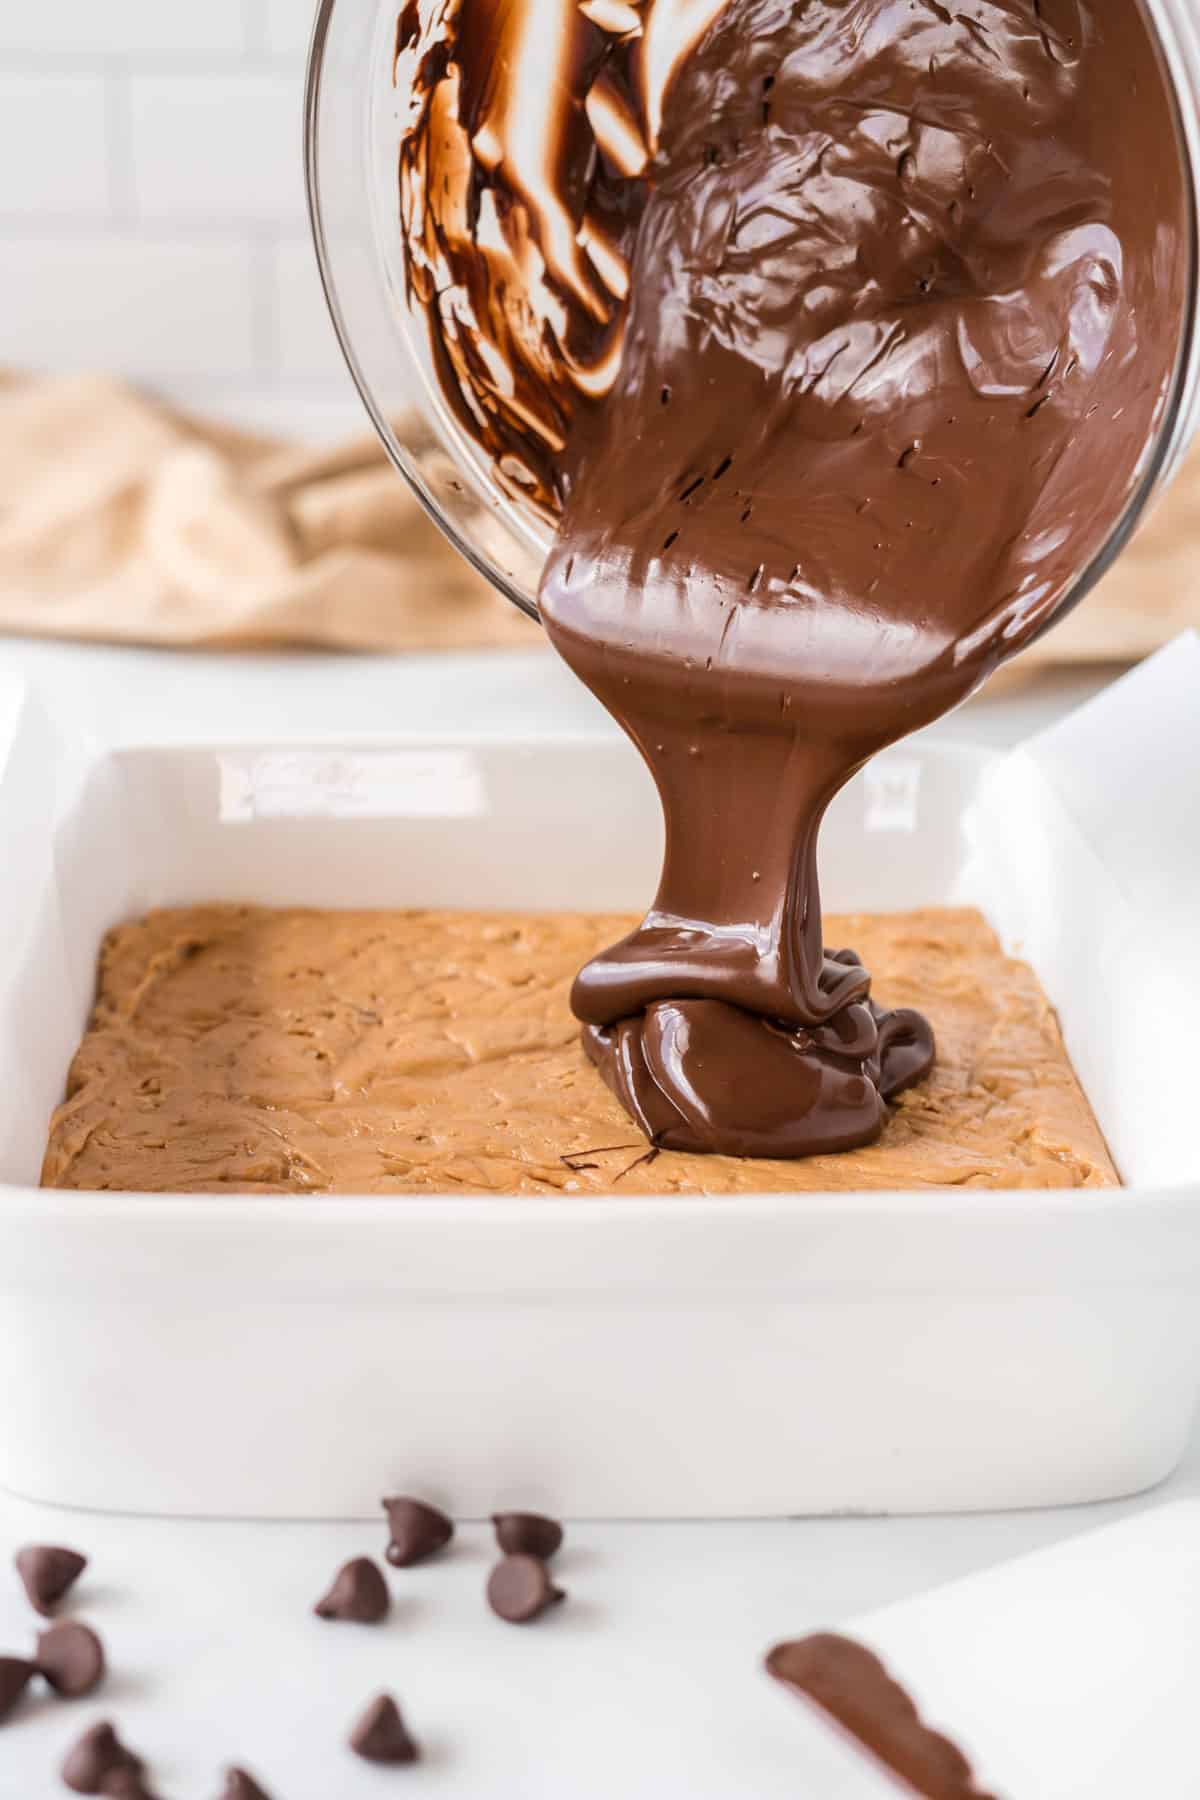 pouring the melted chocolate over the top of the protein bar filling